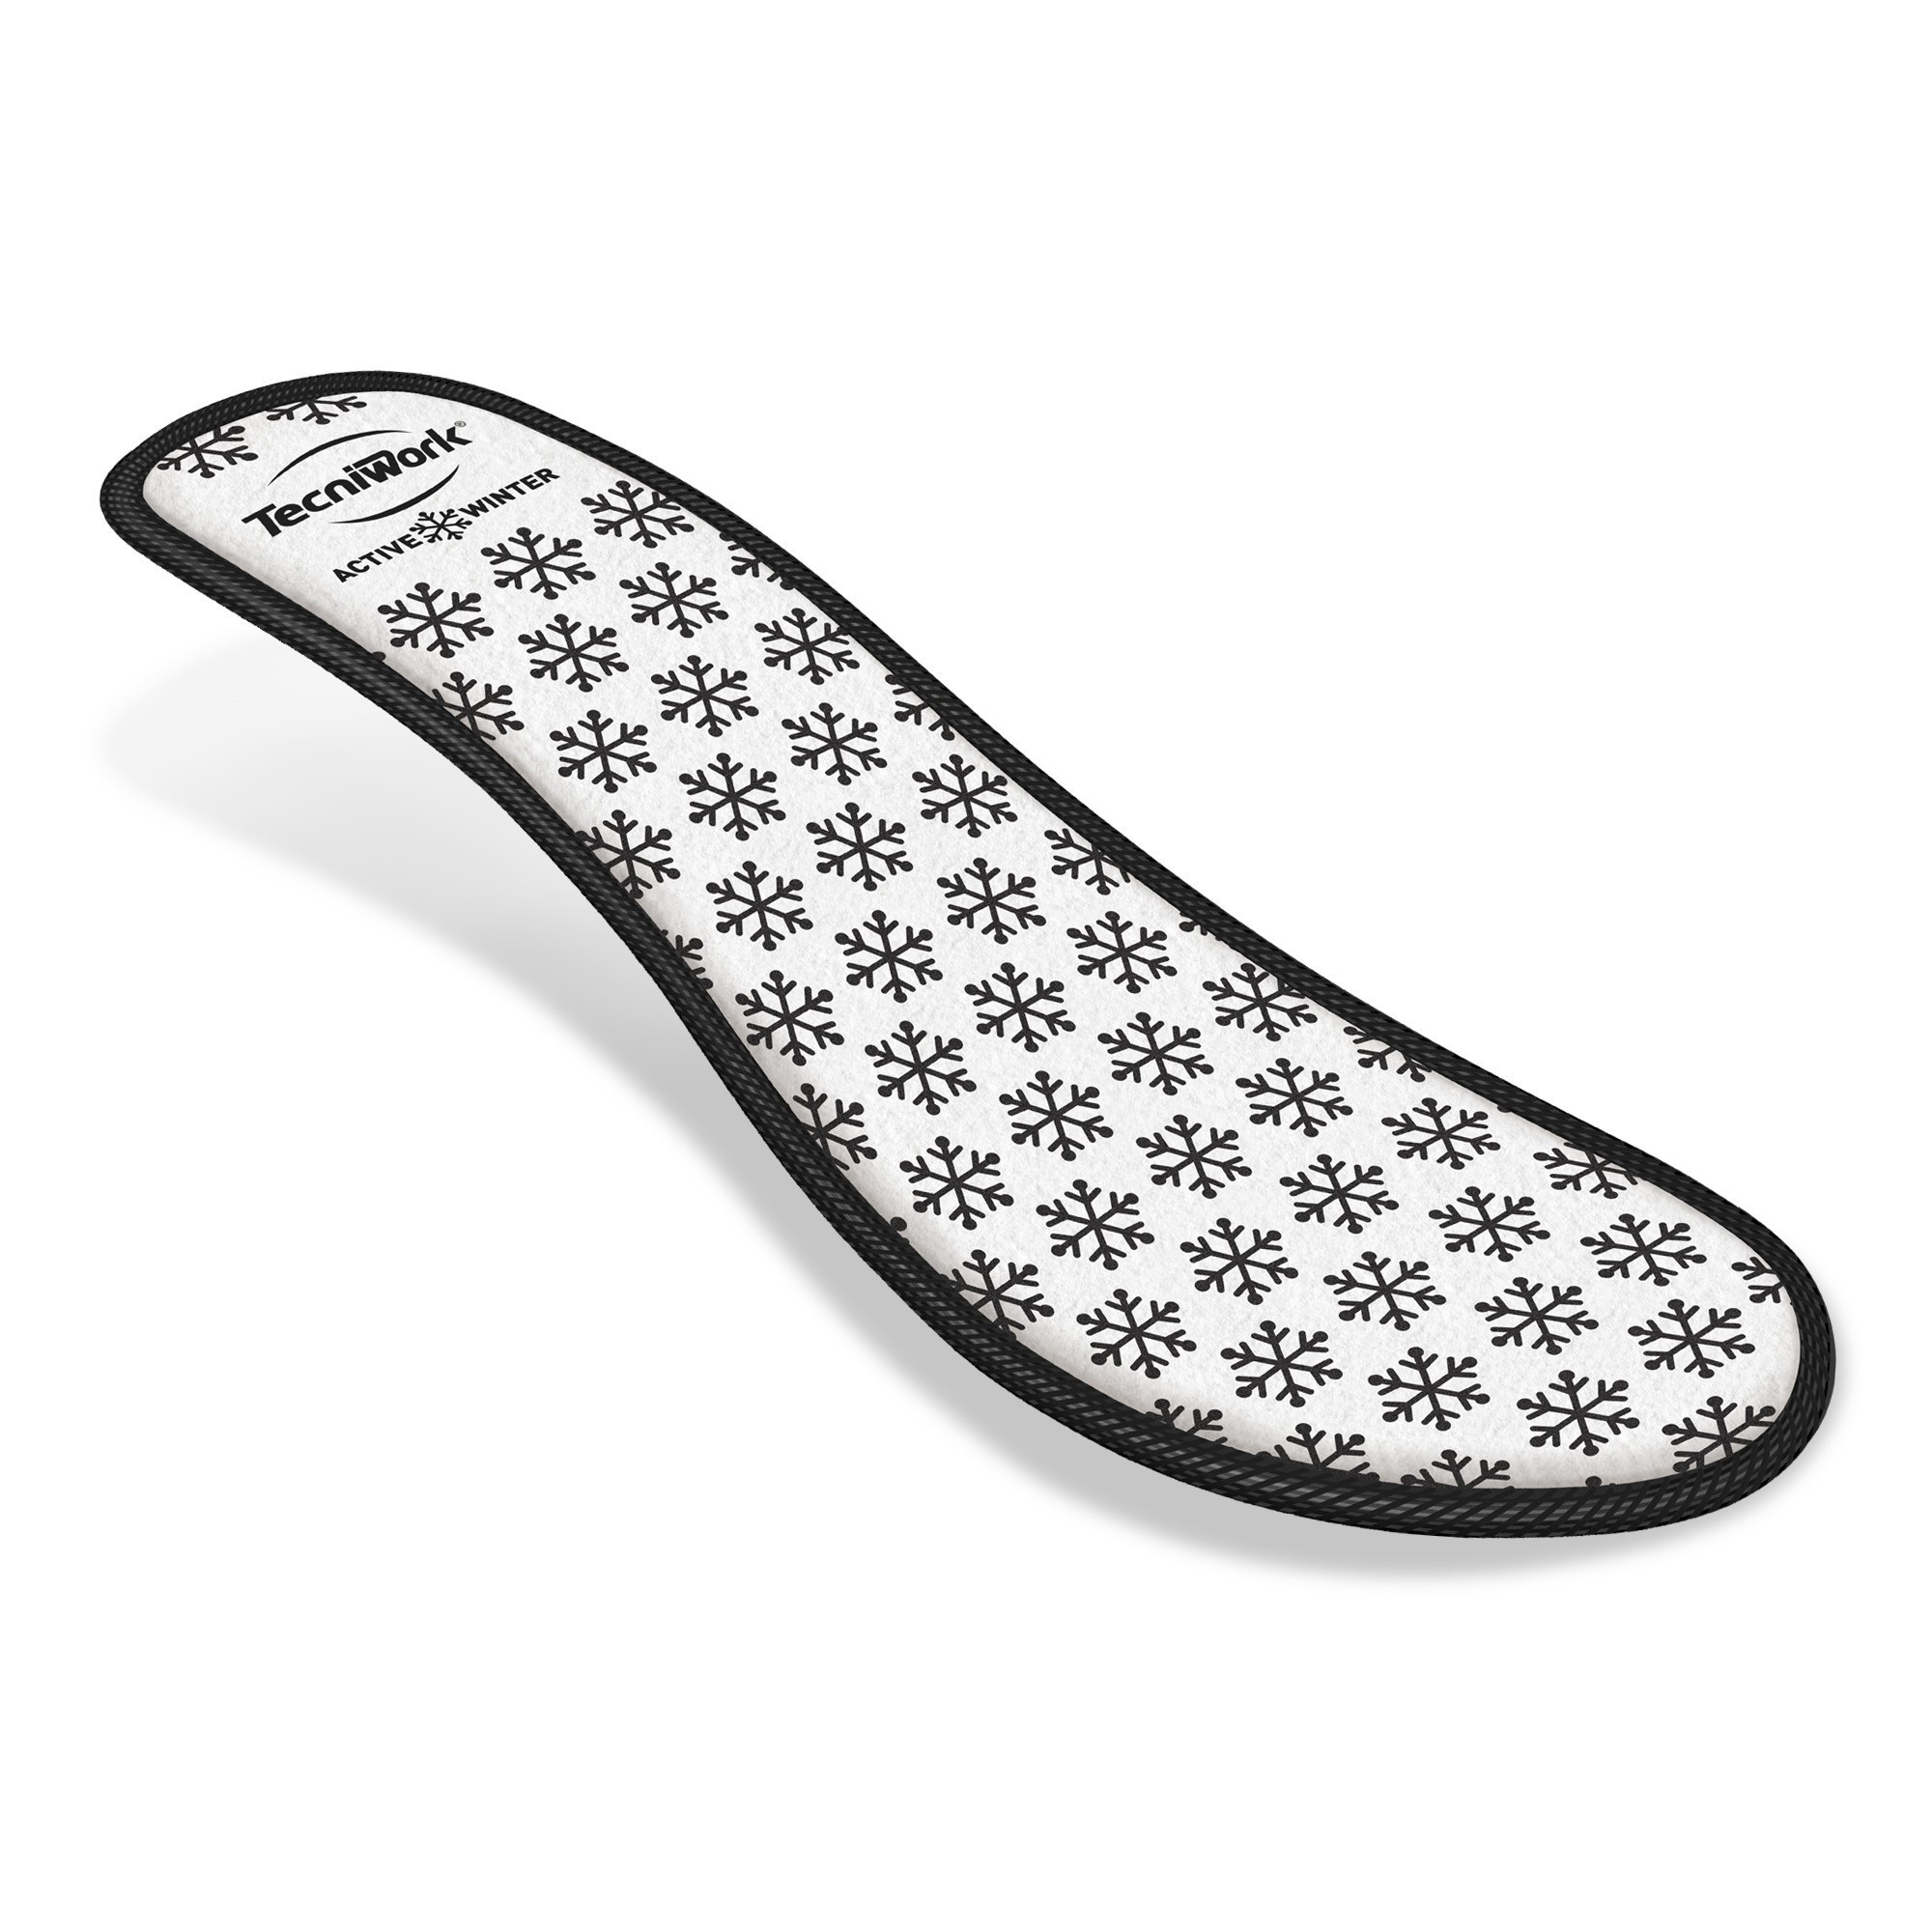 Tecniwork thermal insulating insoles with memory foam Active Winter Set of 24 pairs